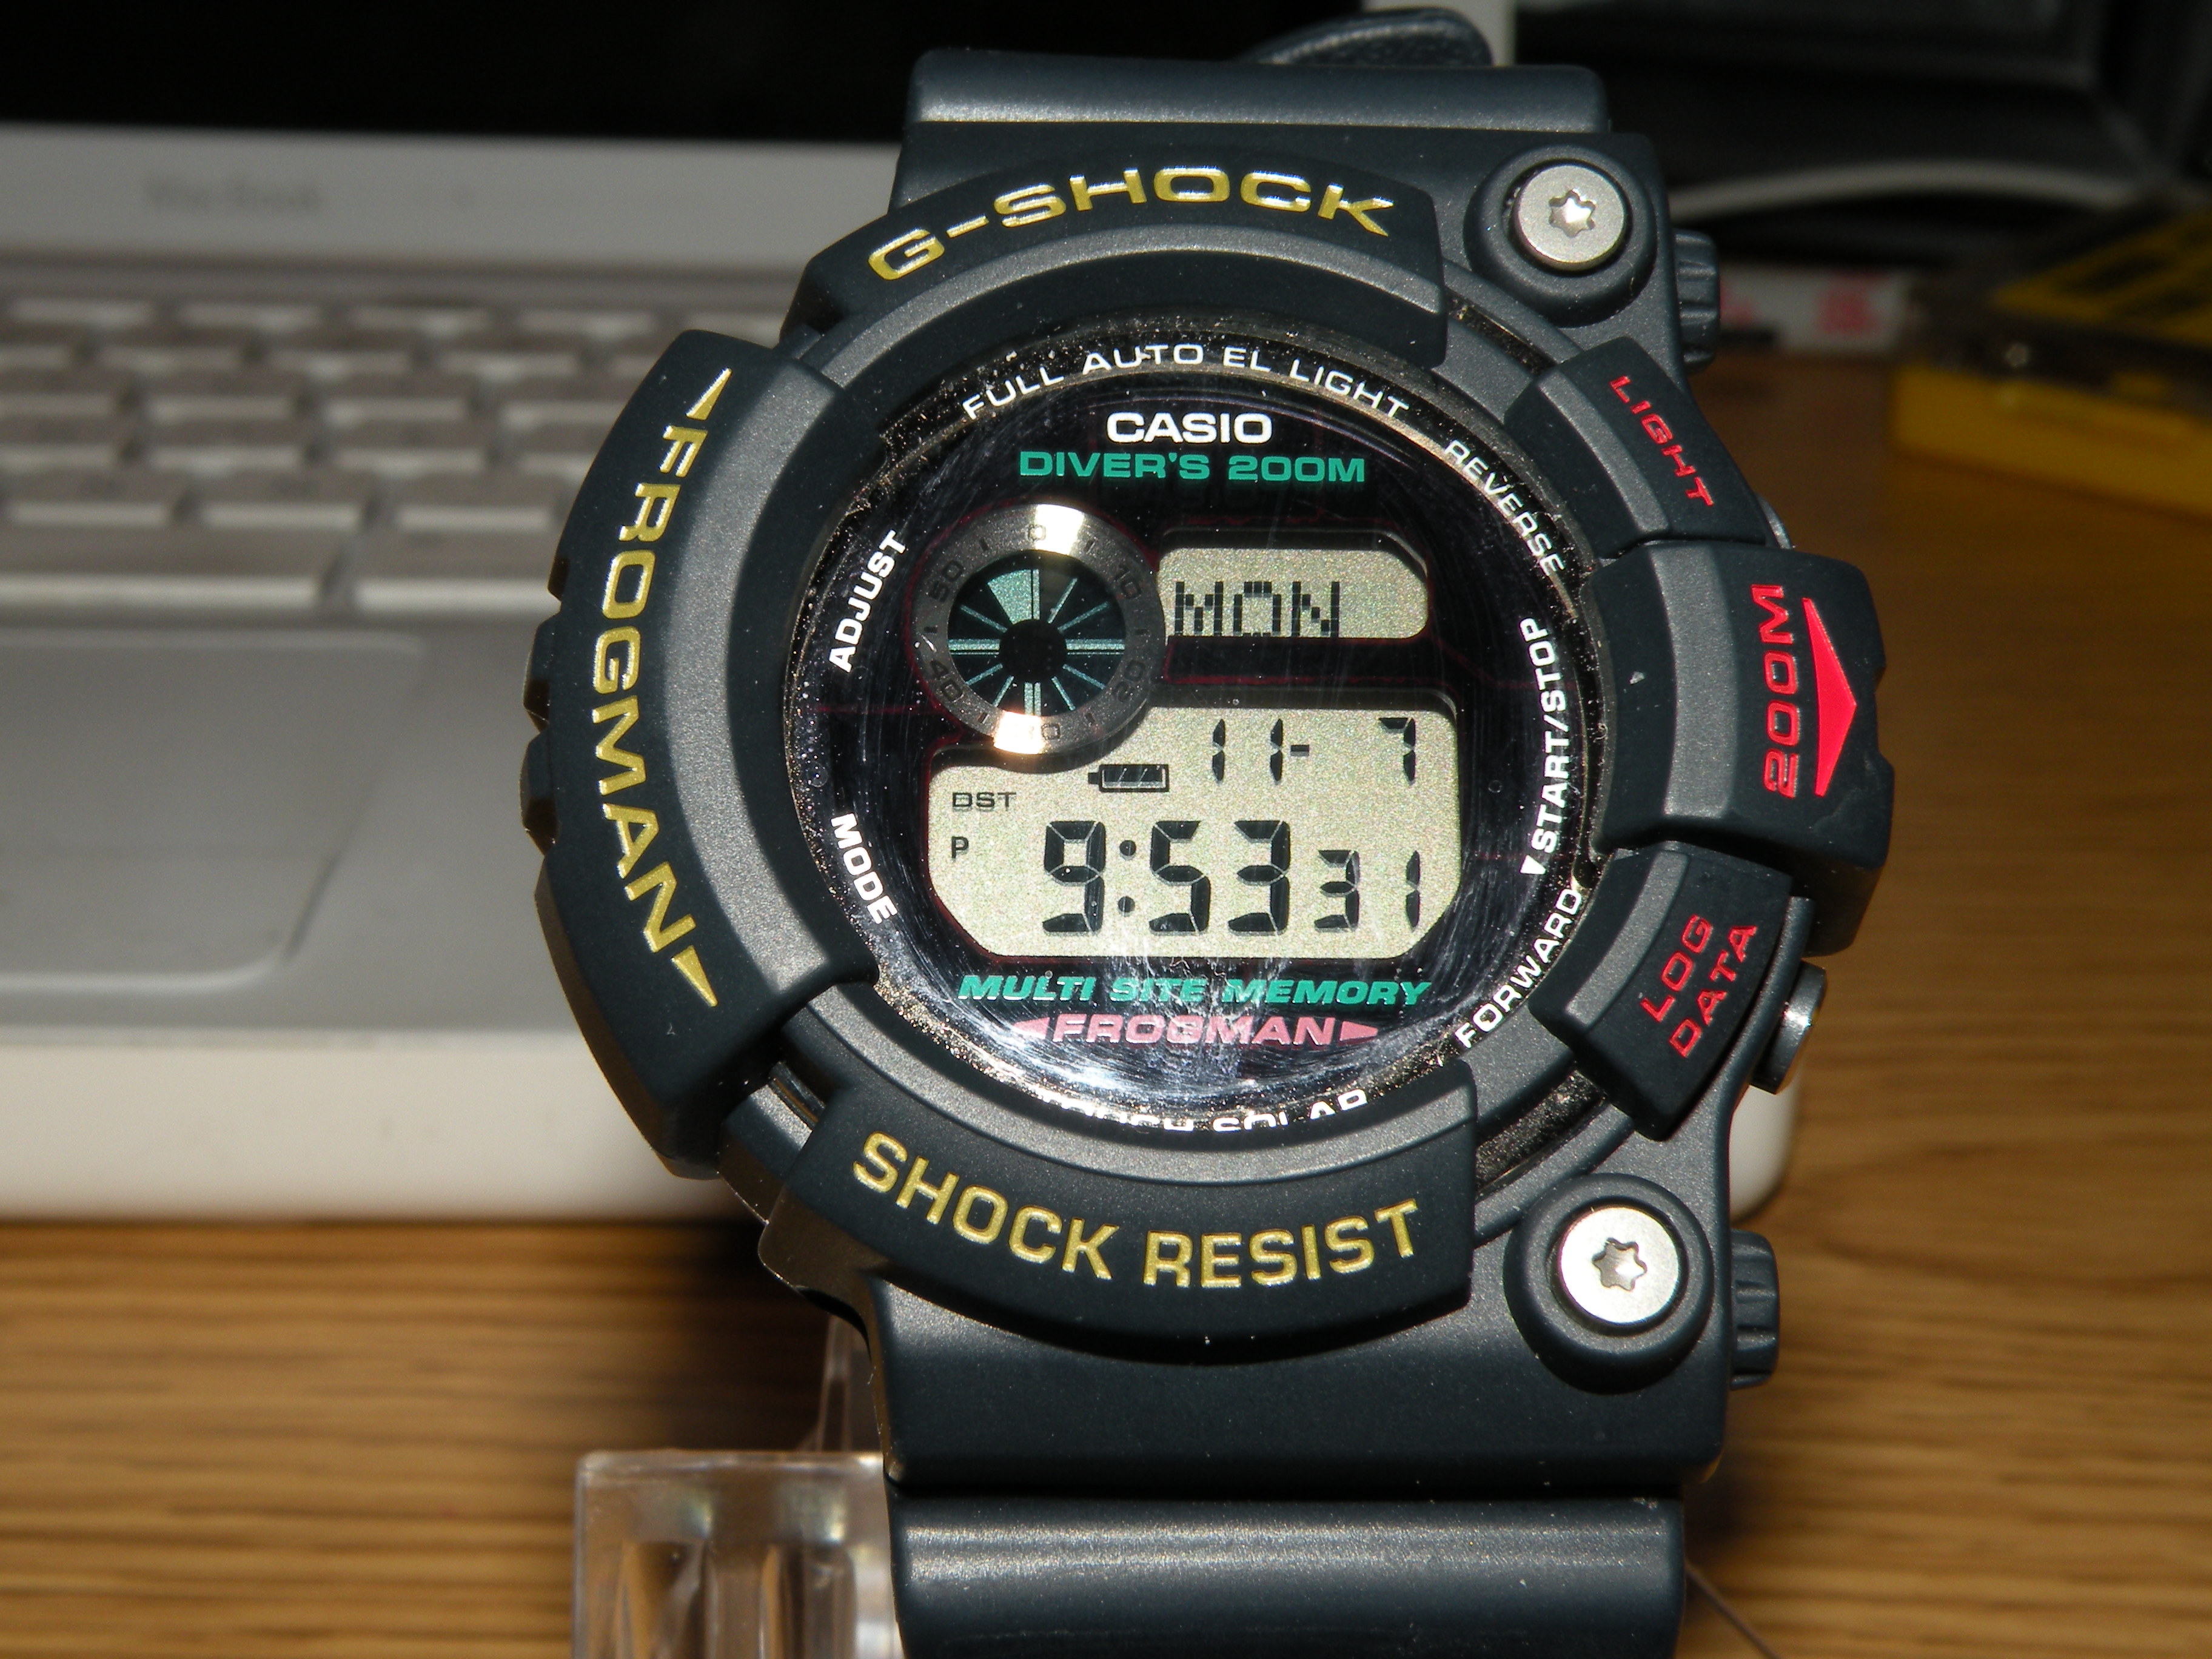 Casio G-shock Frogman GW-200 in all Navy Blue with extra band and